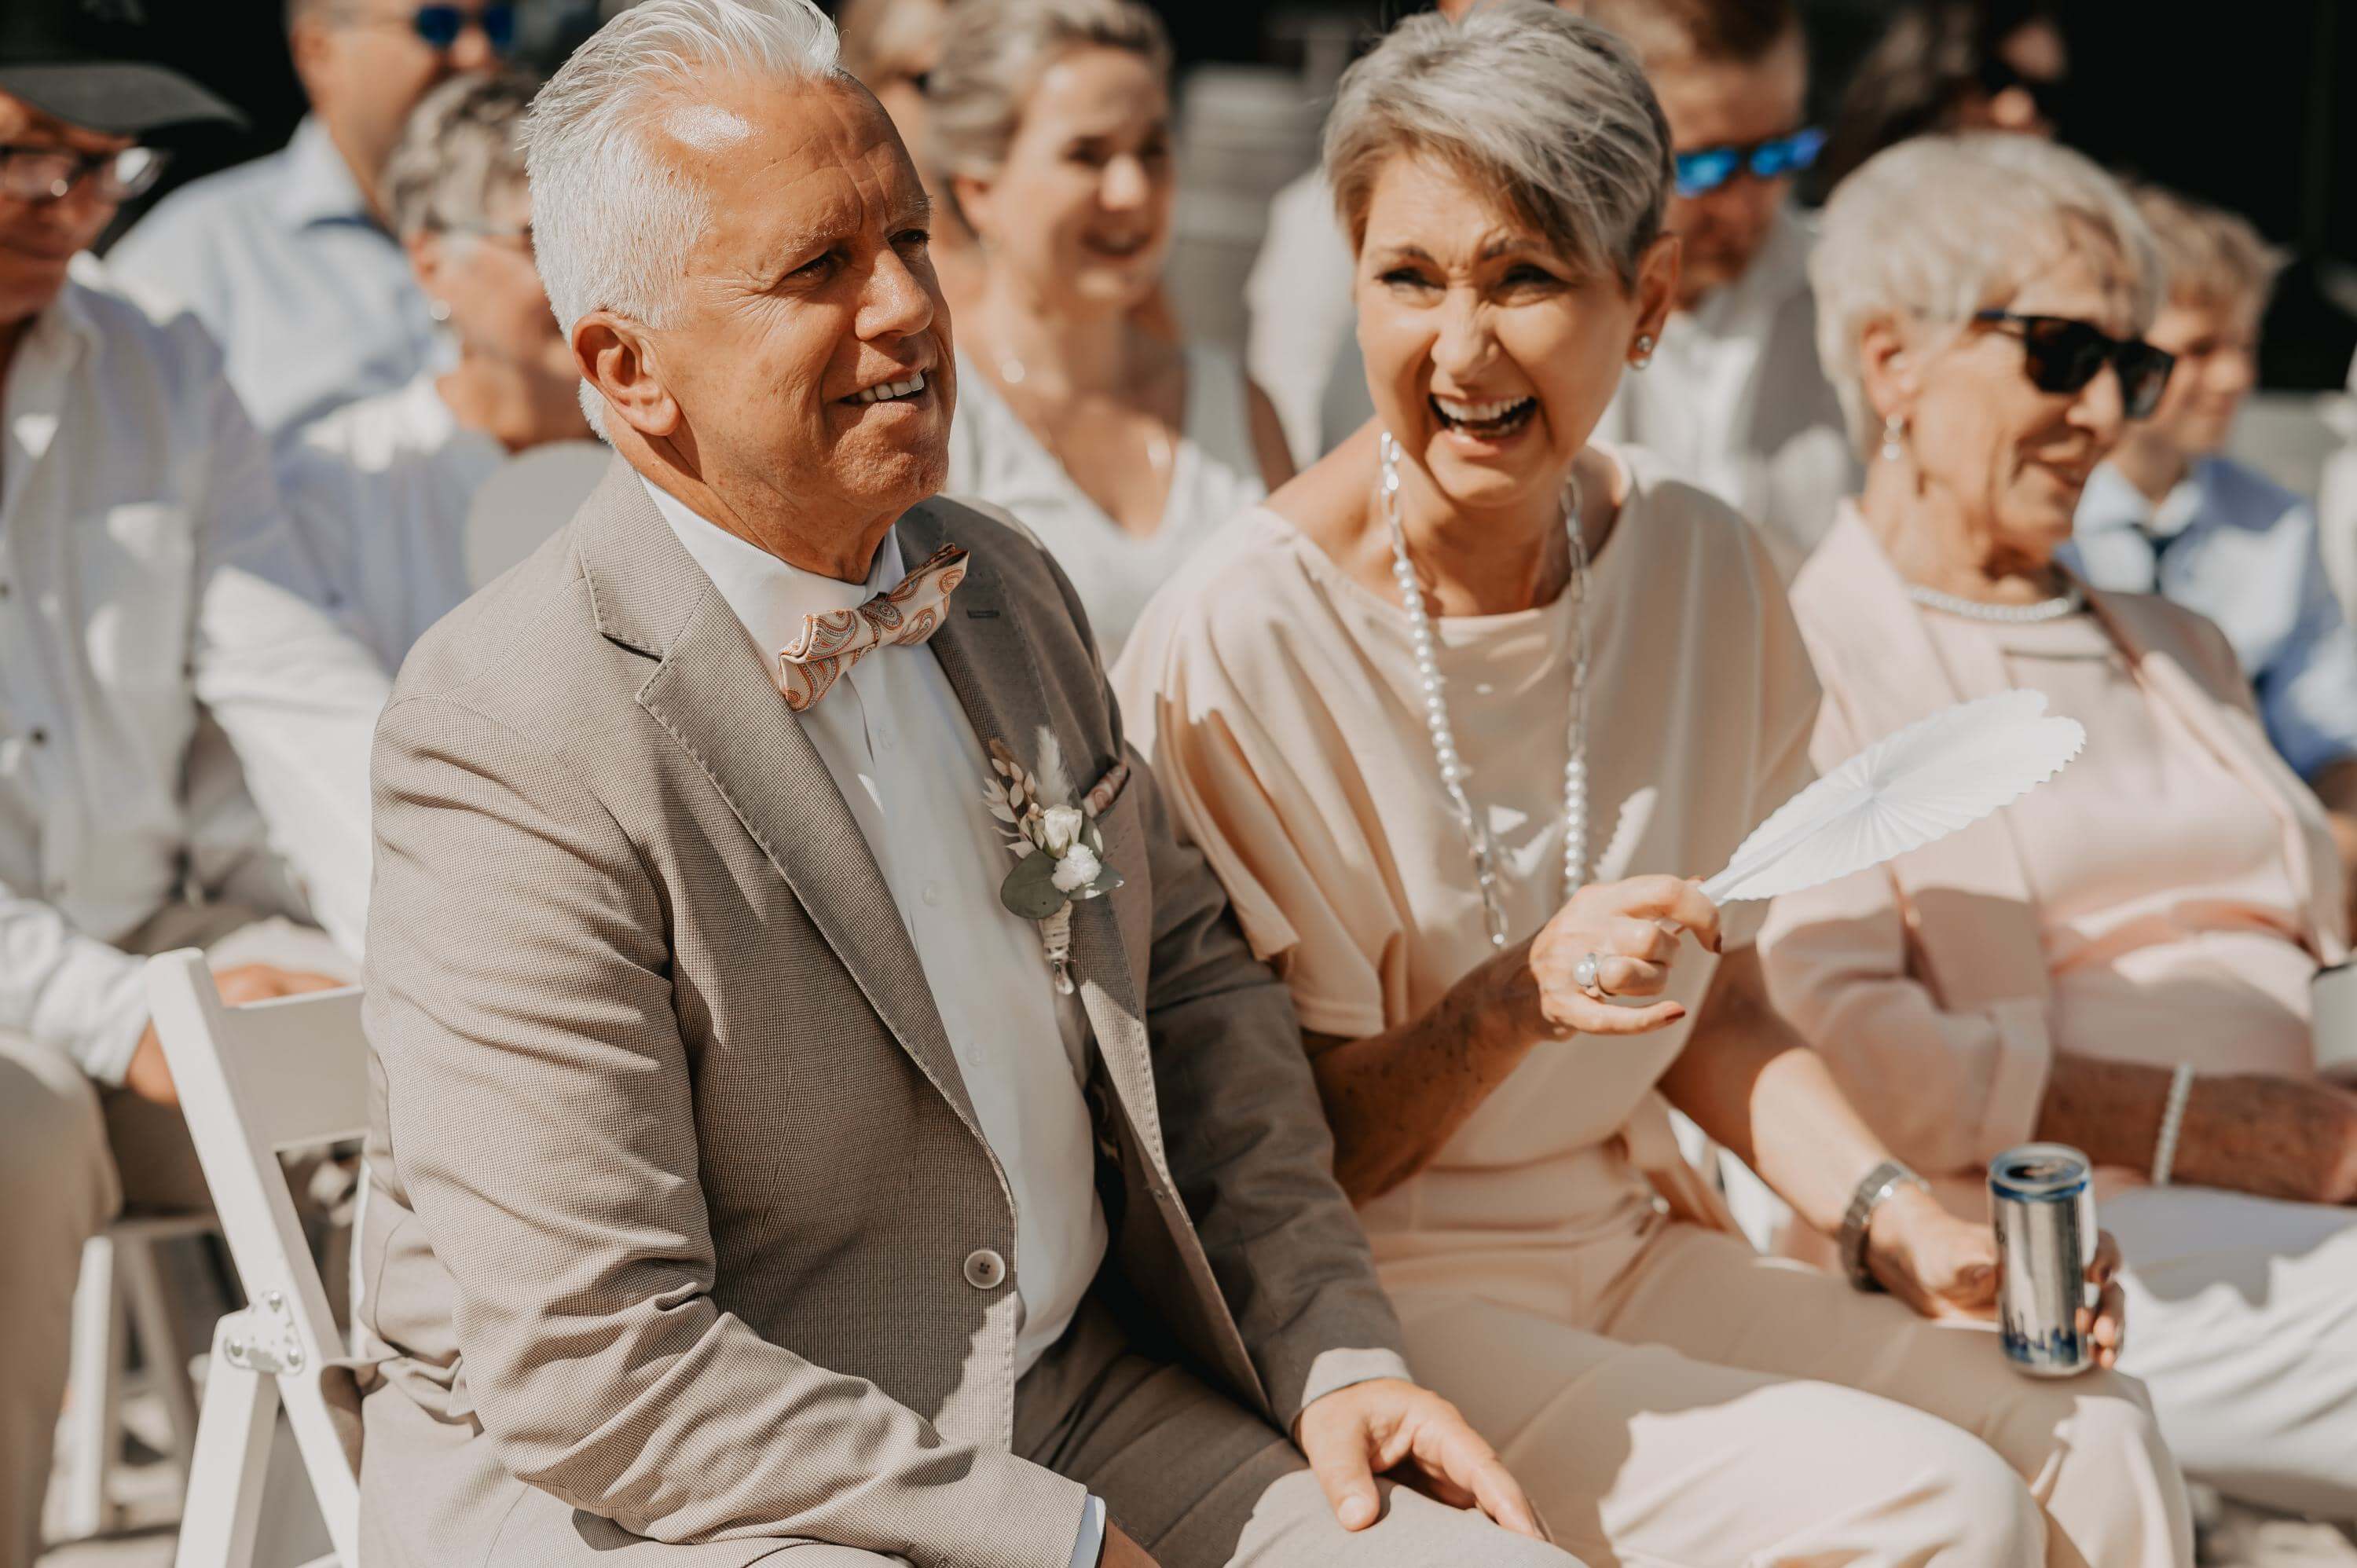 During the free wedding ceremony, the bride's parents sit next to each other, laughing and looking at each other.